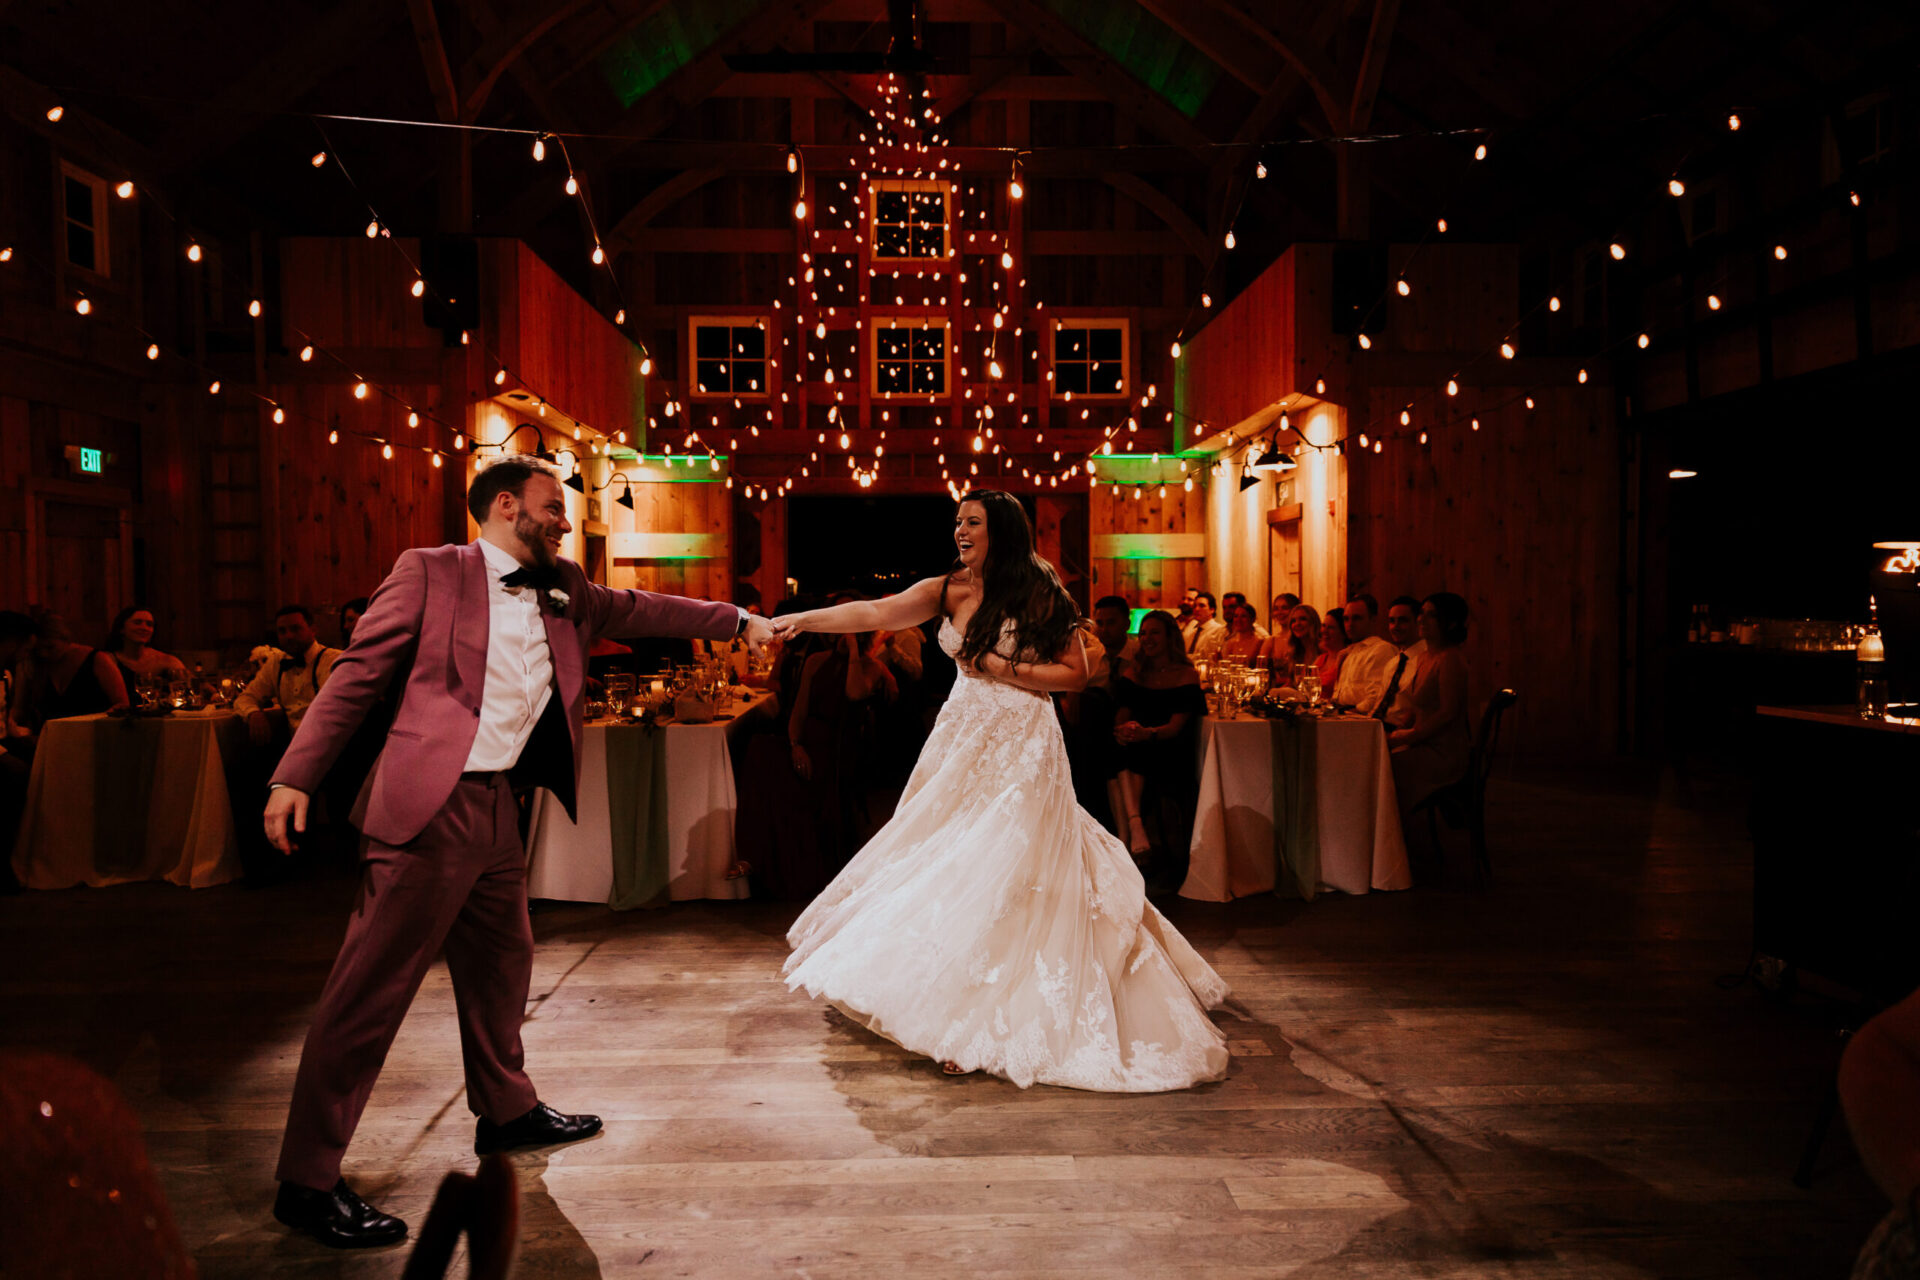 Zion Springs bride and groom dance in rustic barn with twinkling lights